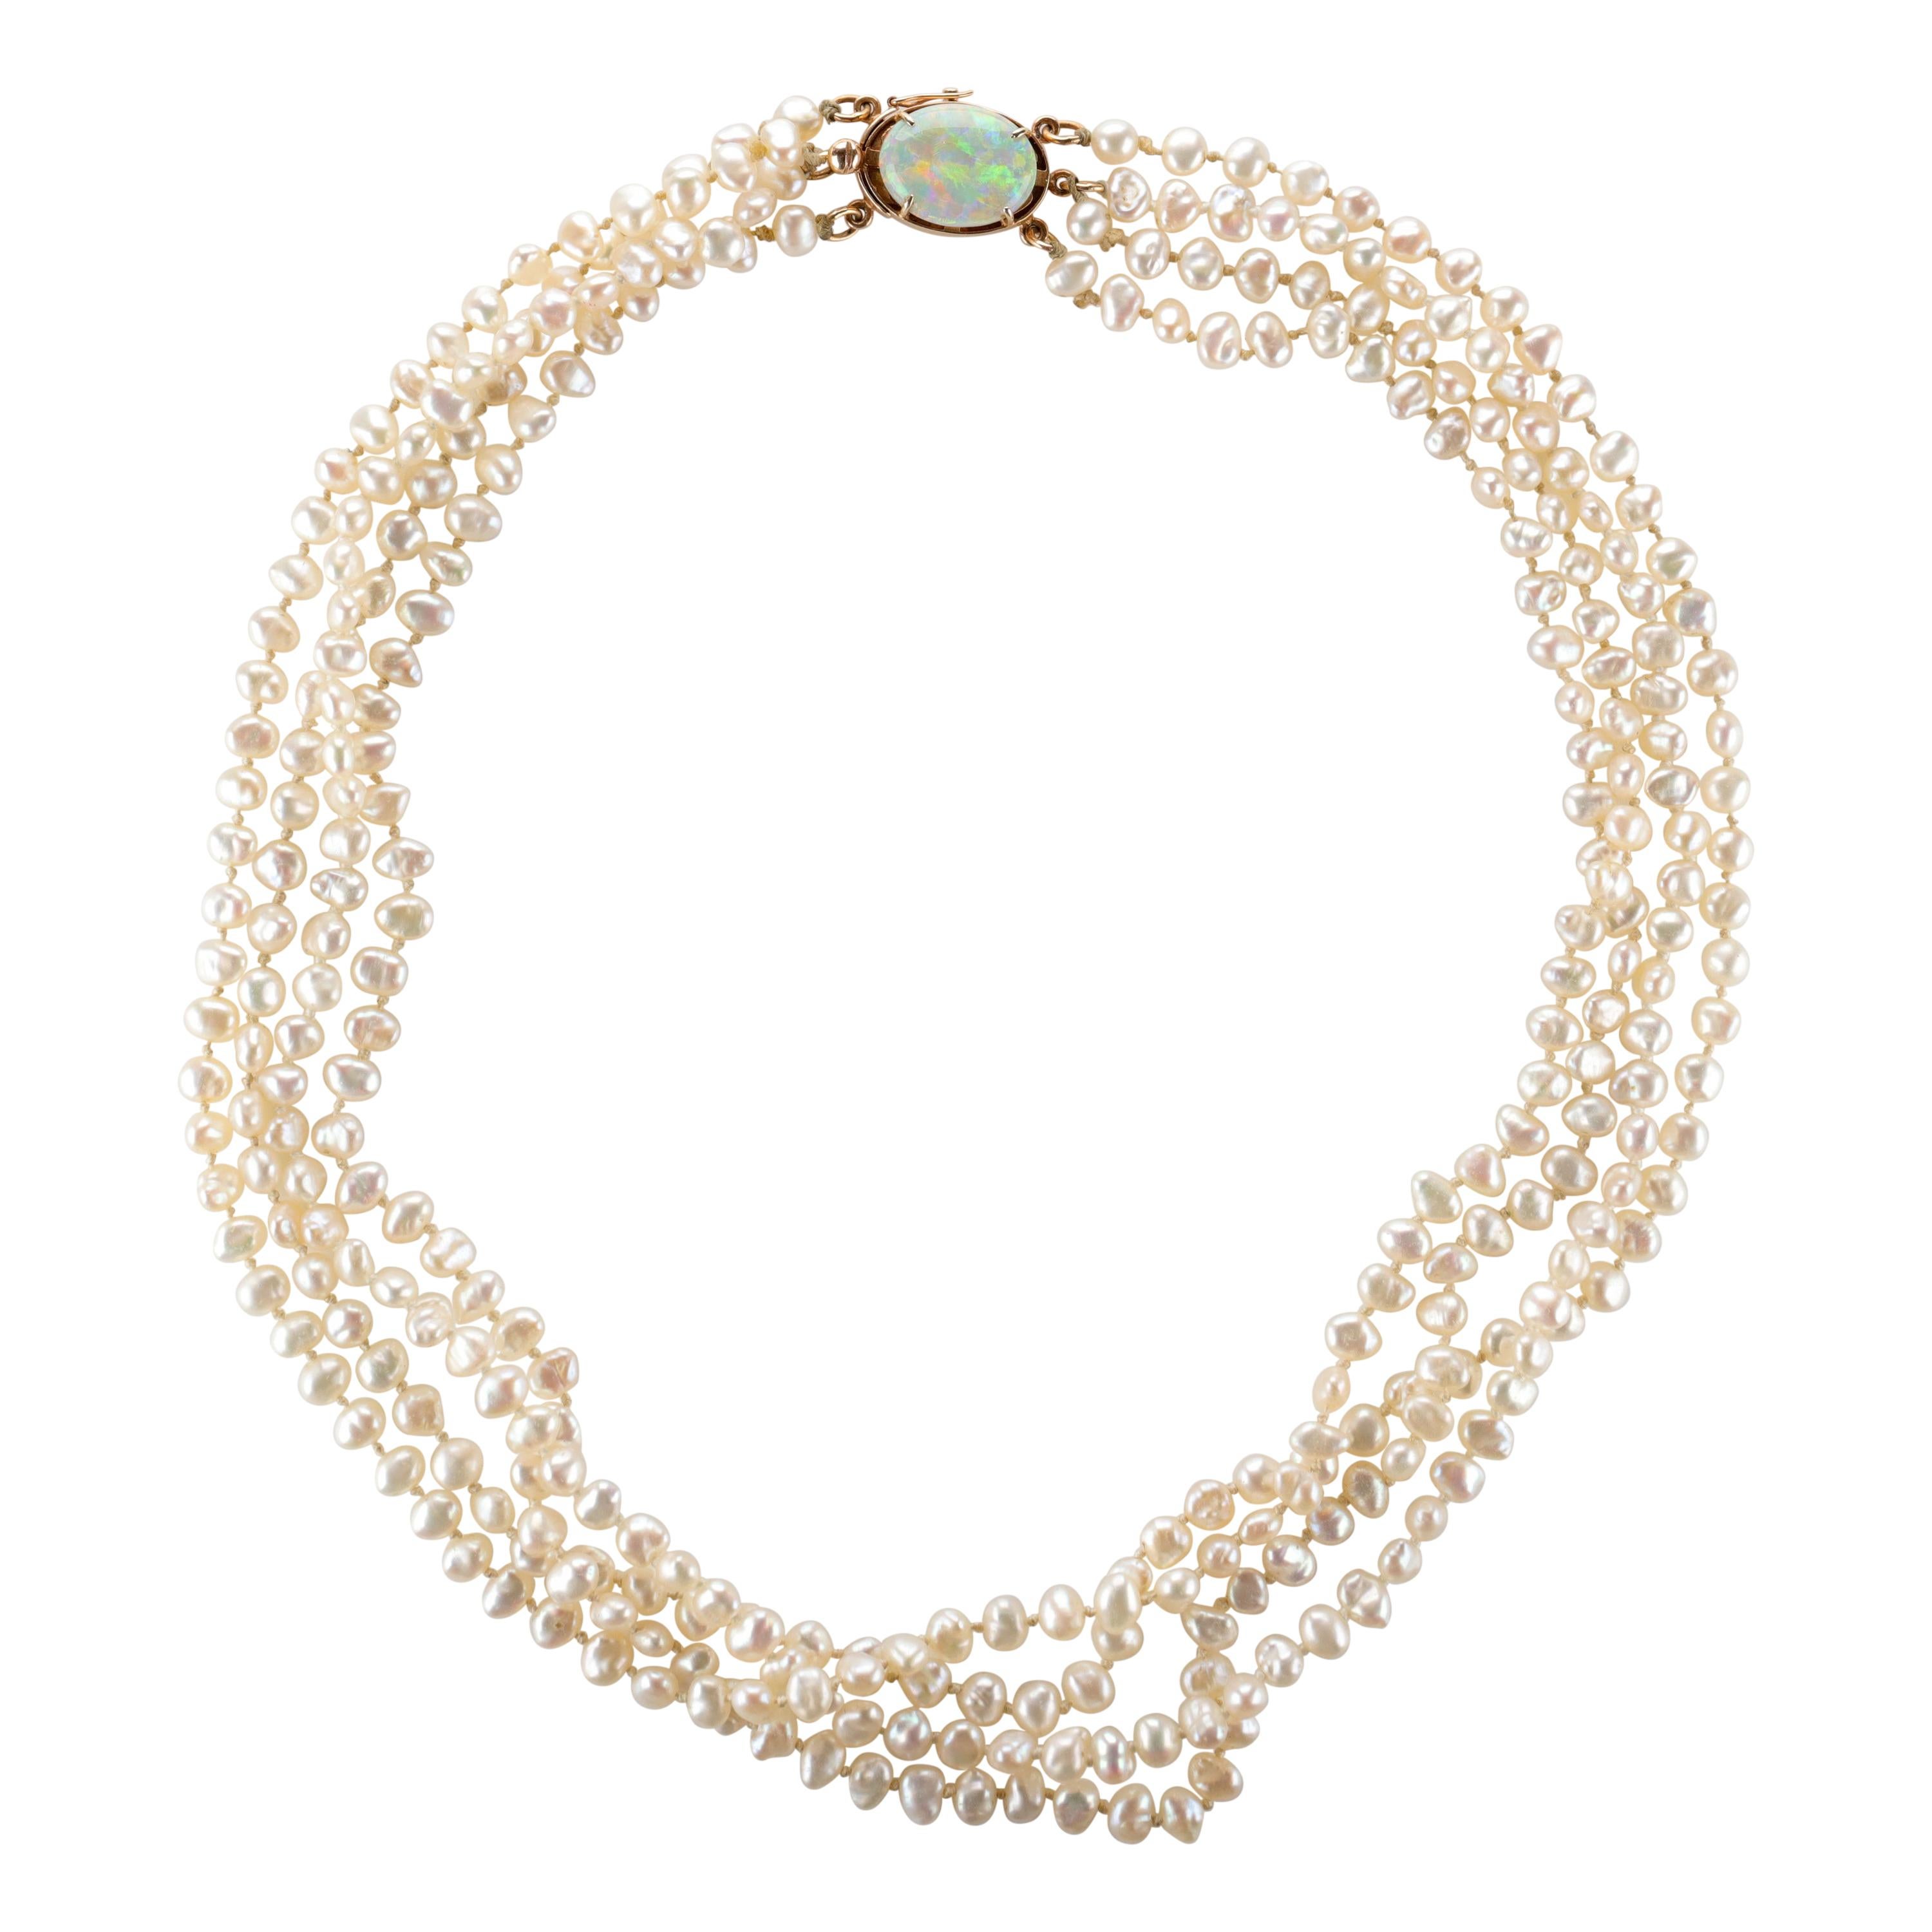 Gump's Pearl and Opal Necklace Features Rare & Authentic Biwa Pearls